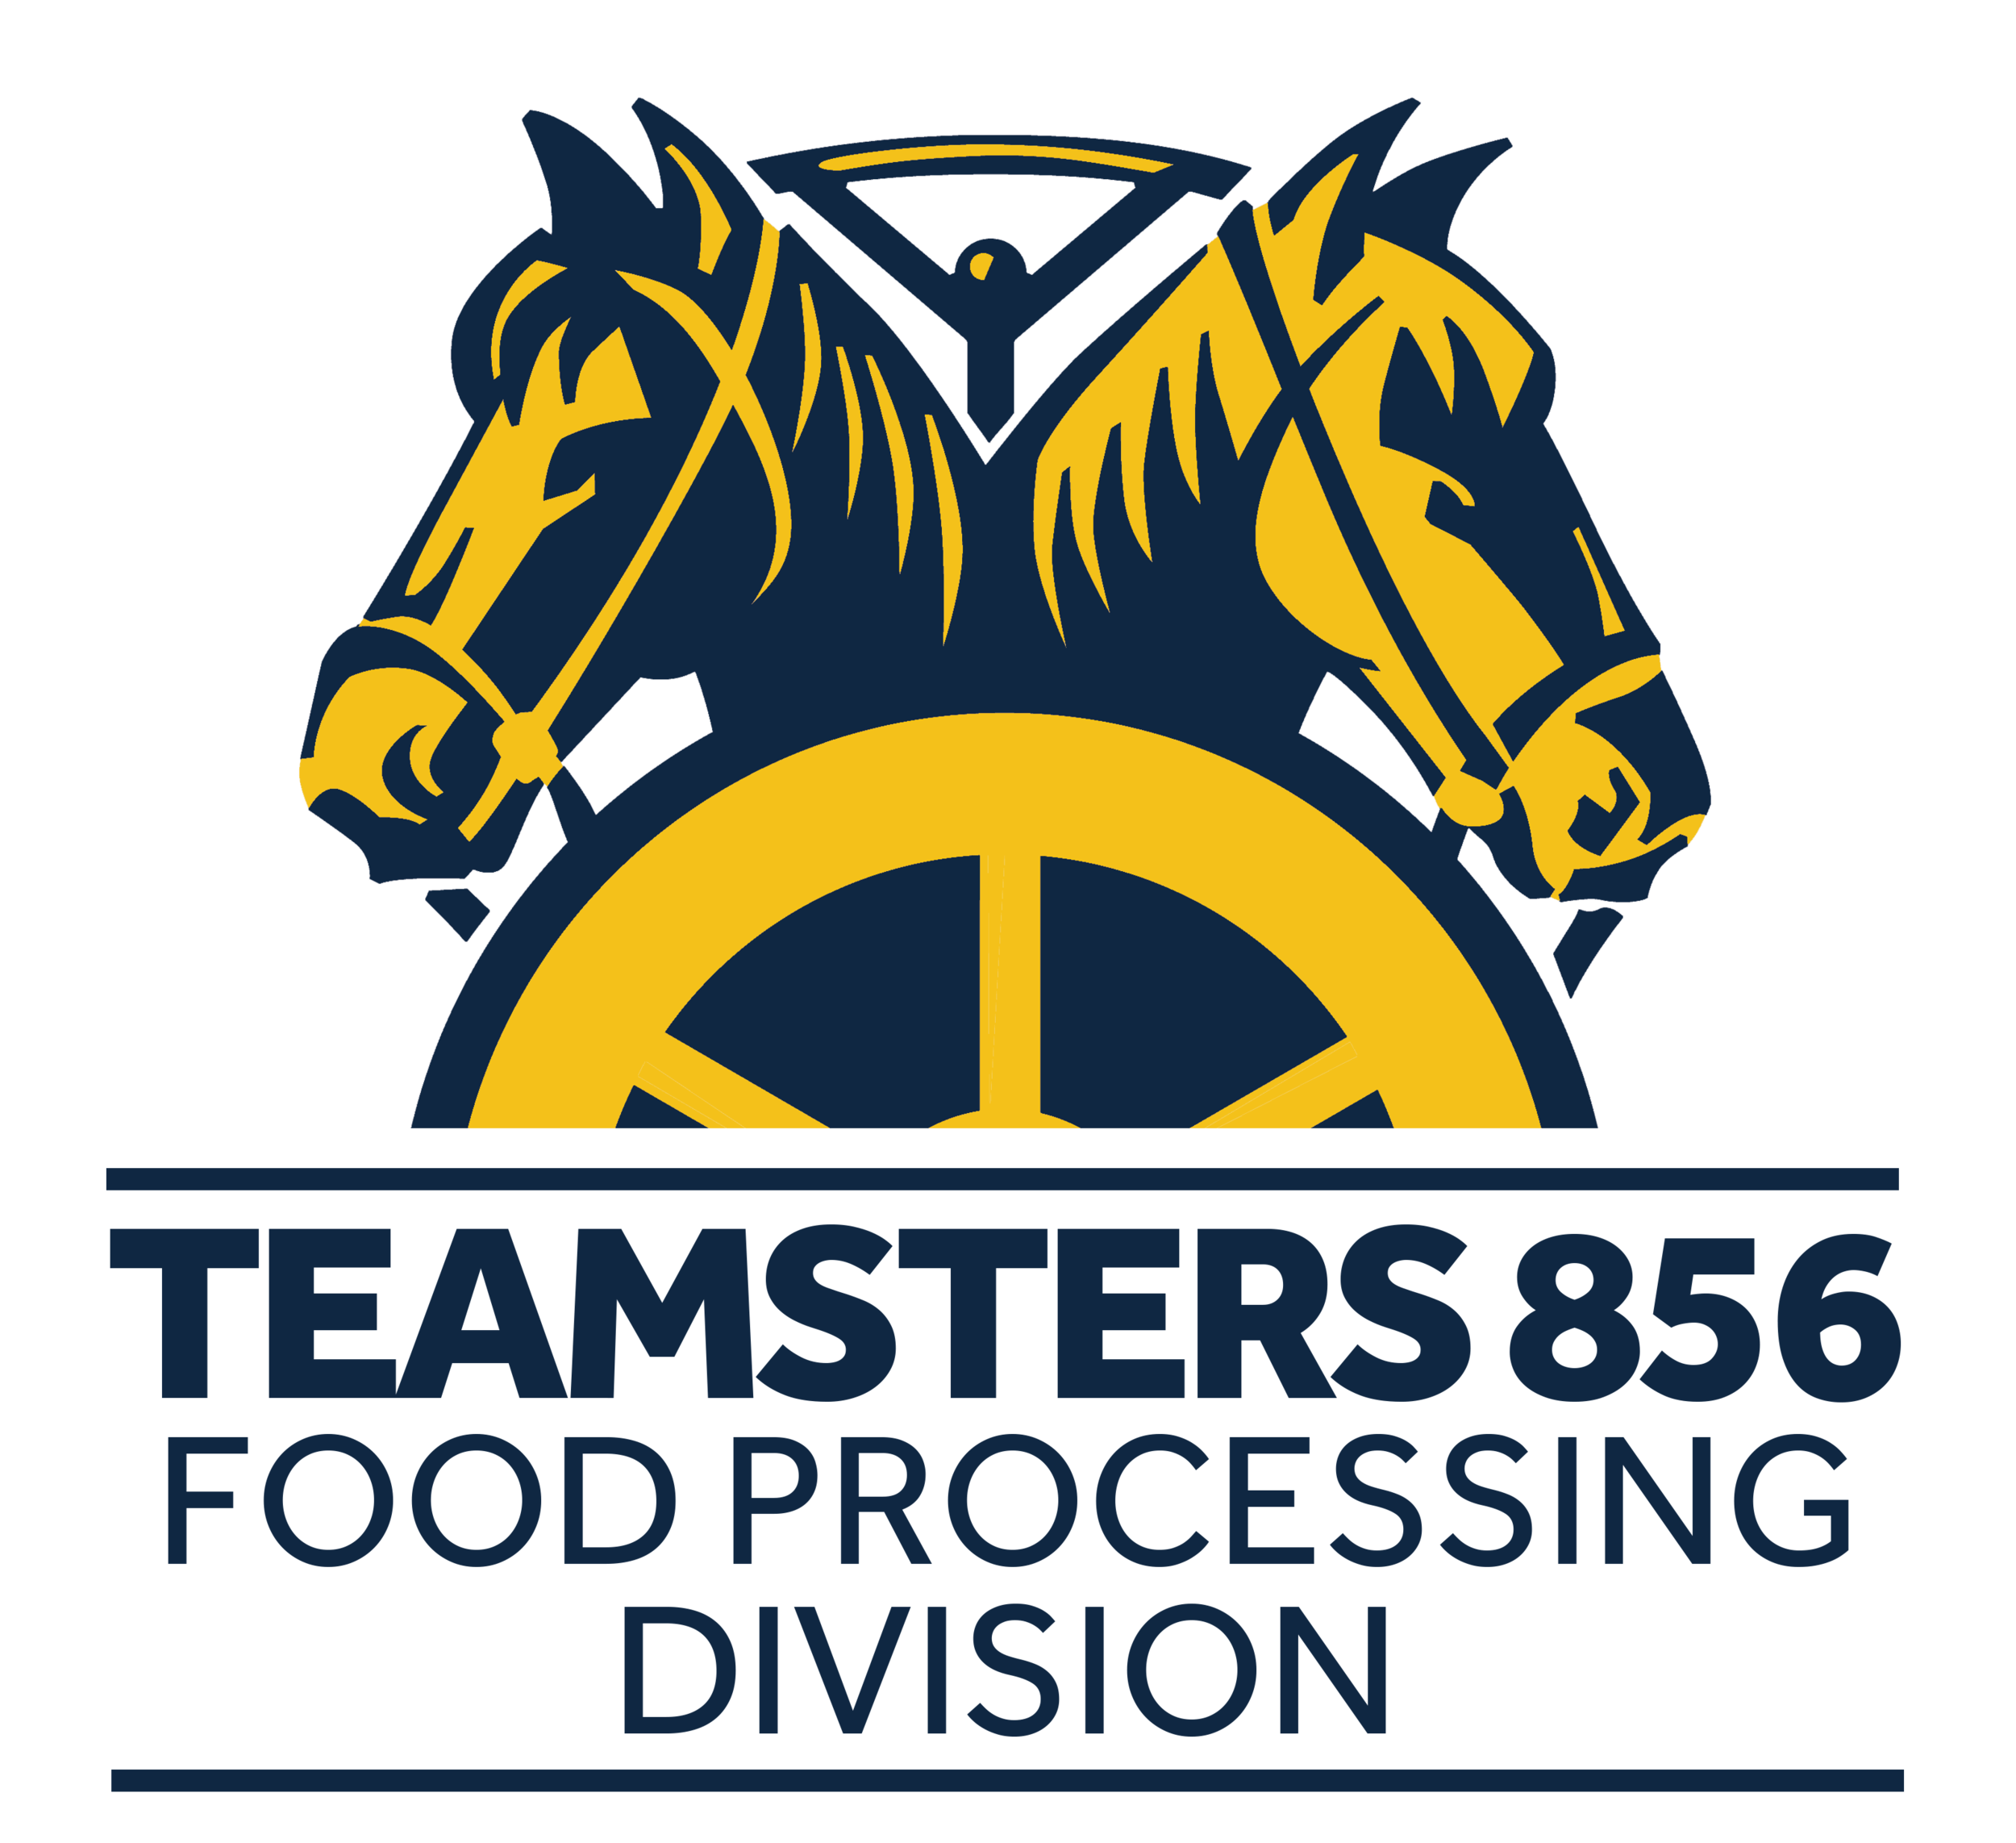 Teamsters 856 Food Processing Division